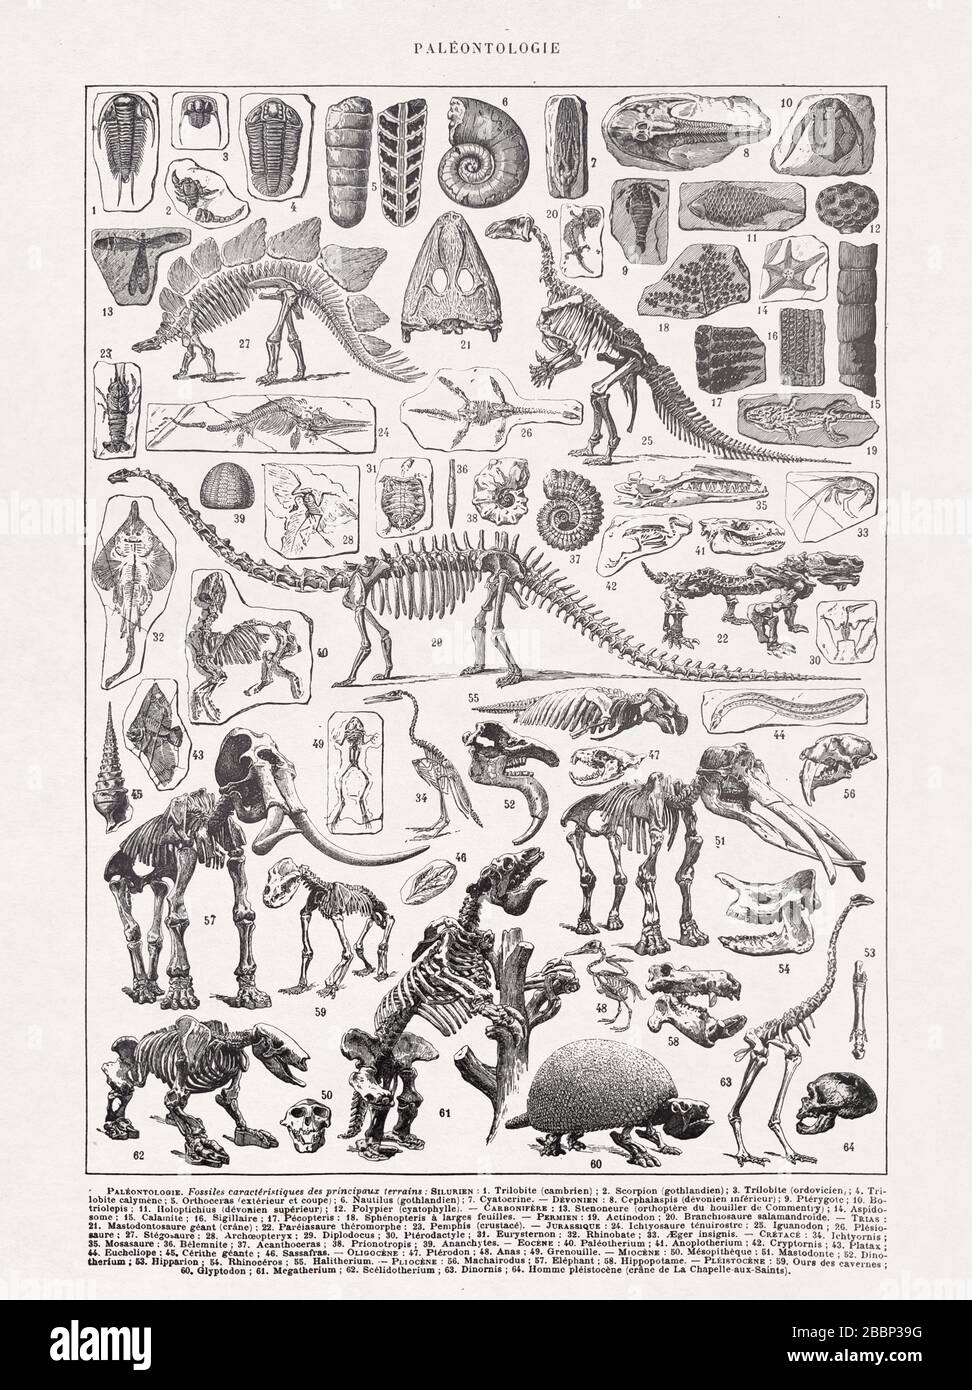 Old illustration about the Skeletons in paleontology printed in the late 19th century. Stock Photo